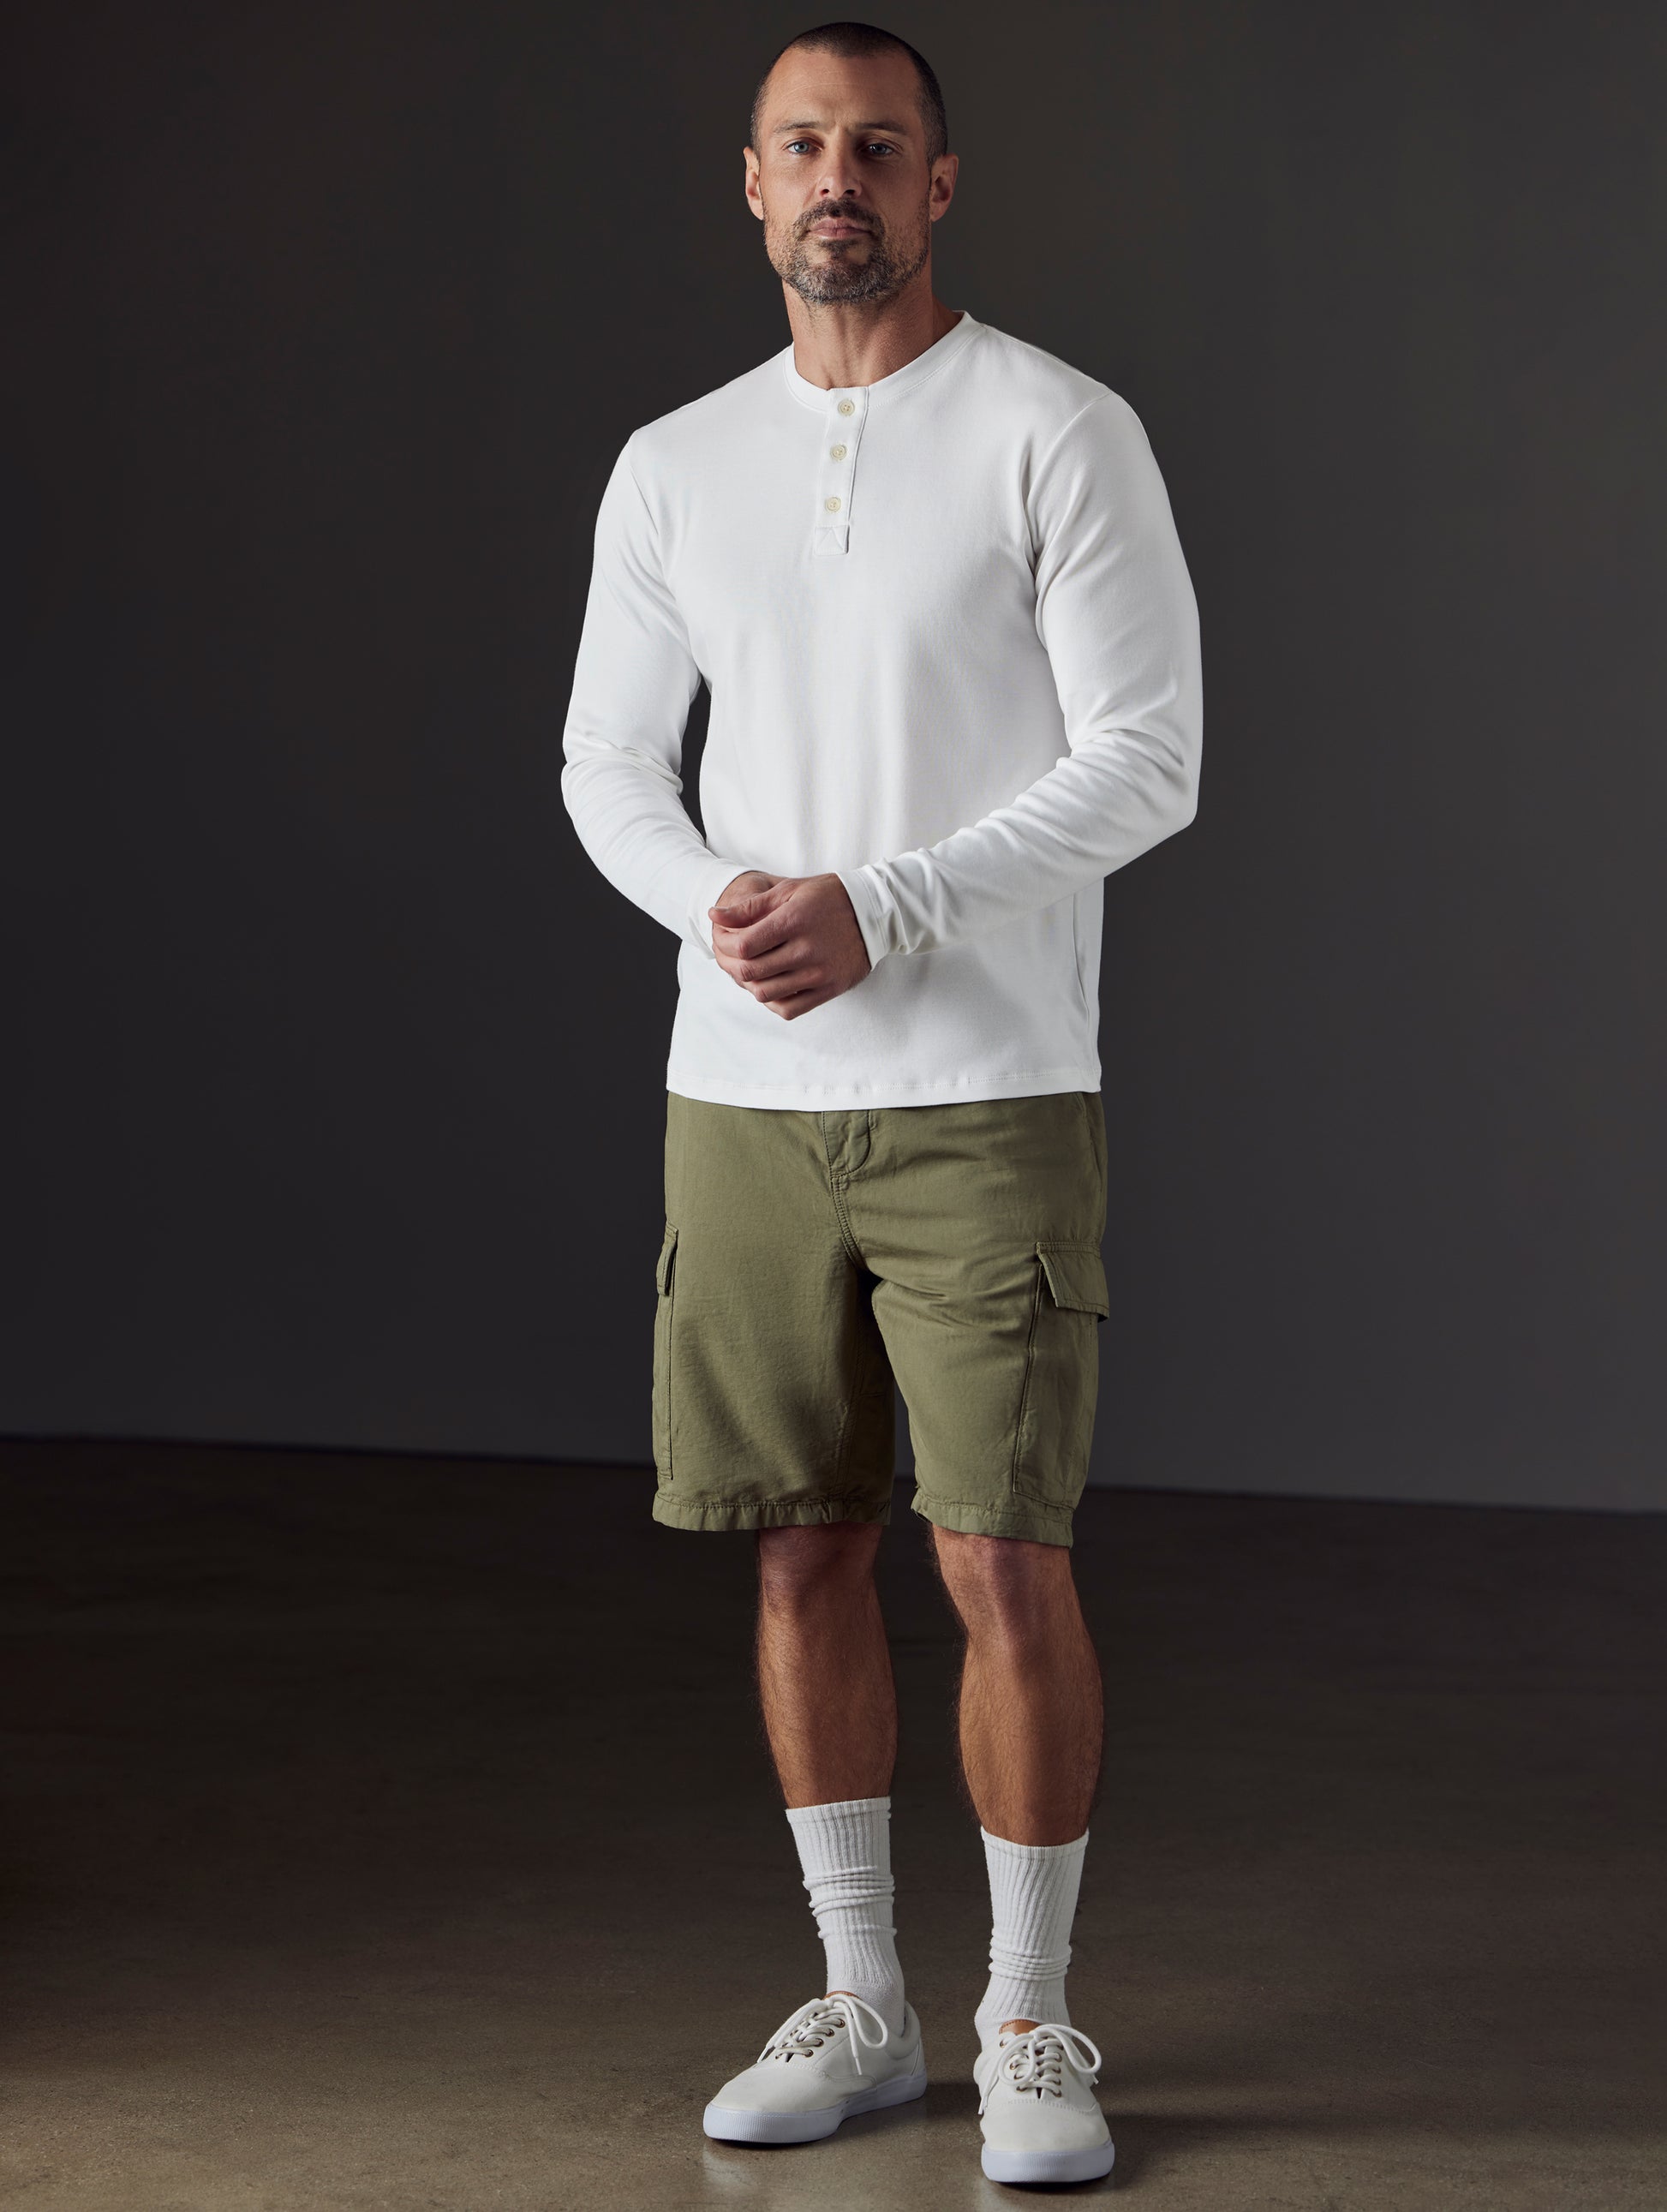 green fatigue shorts from AETHER Apparel